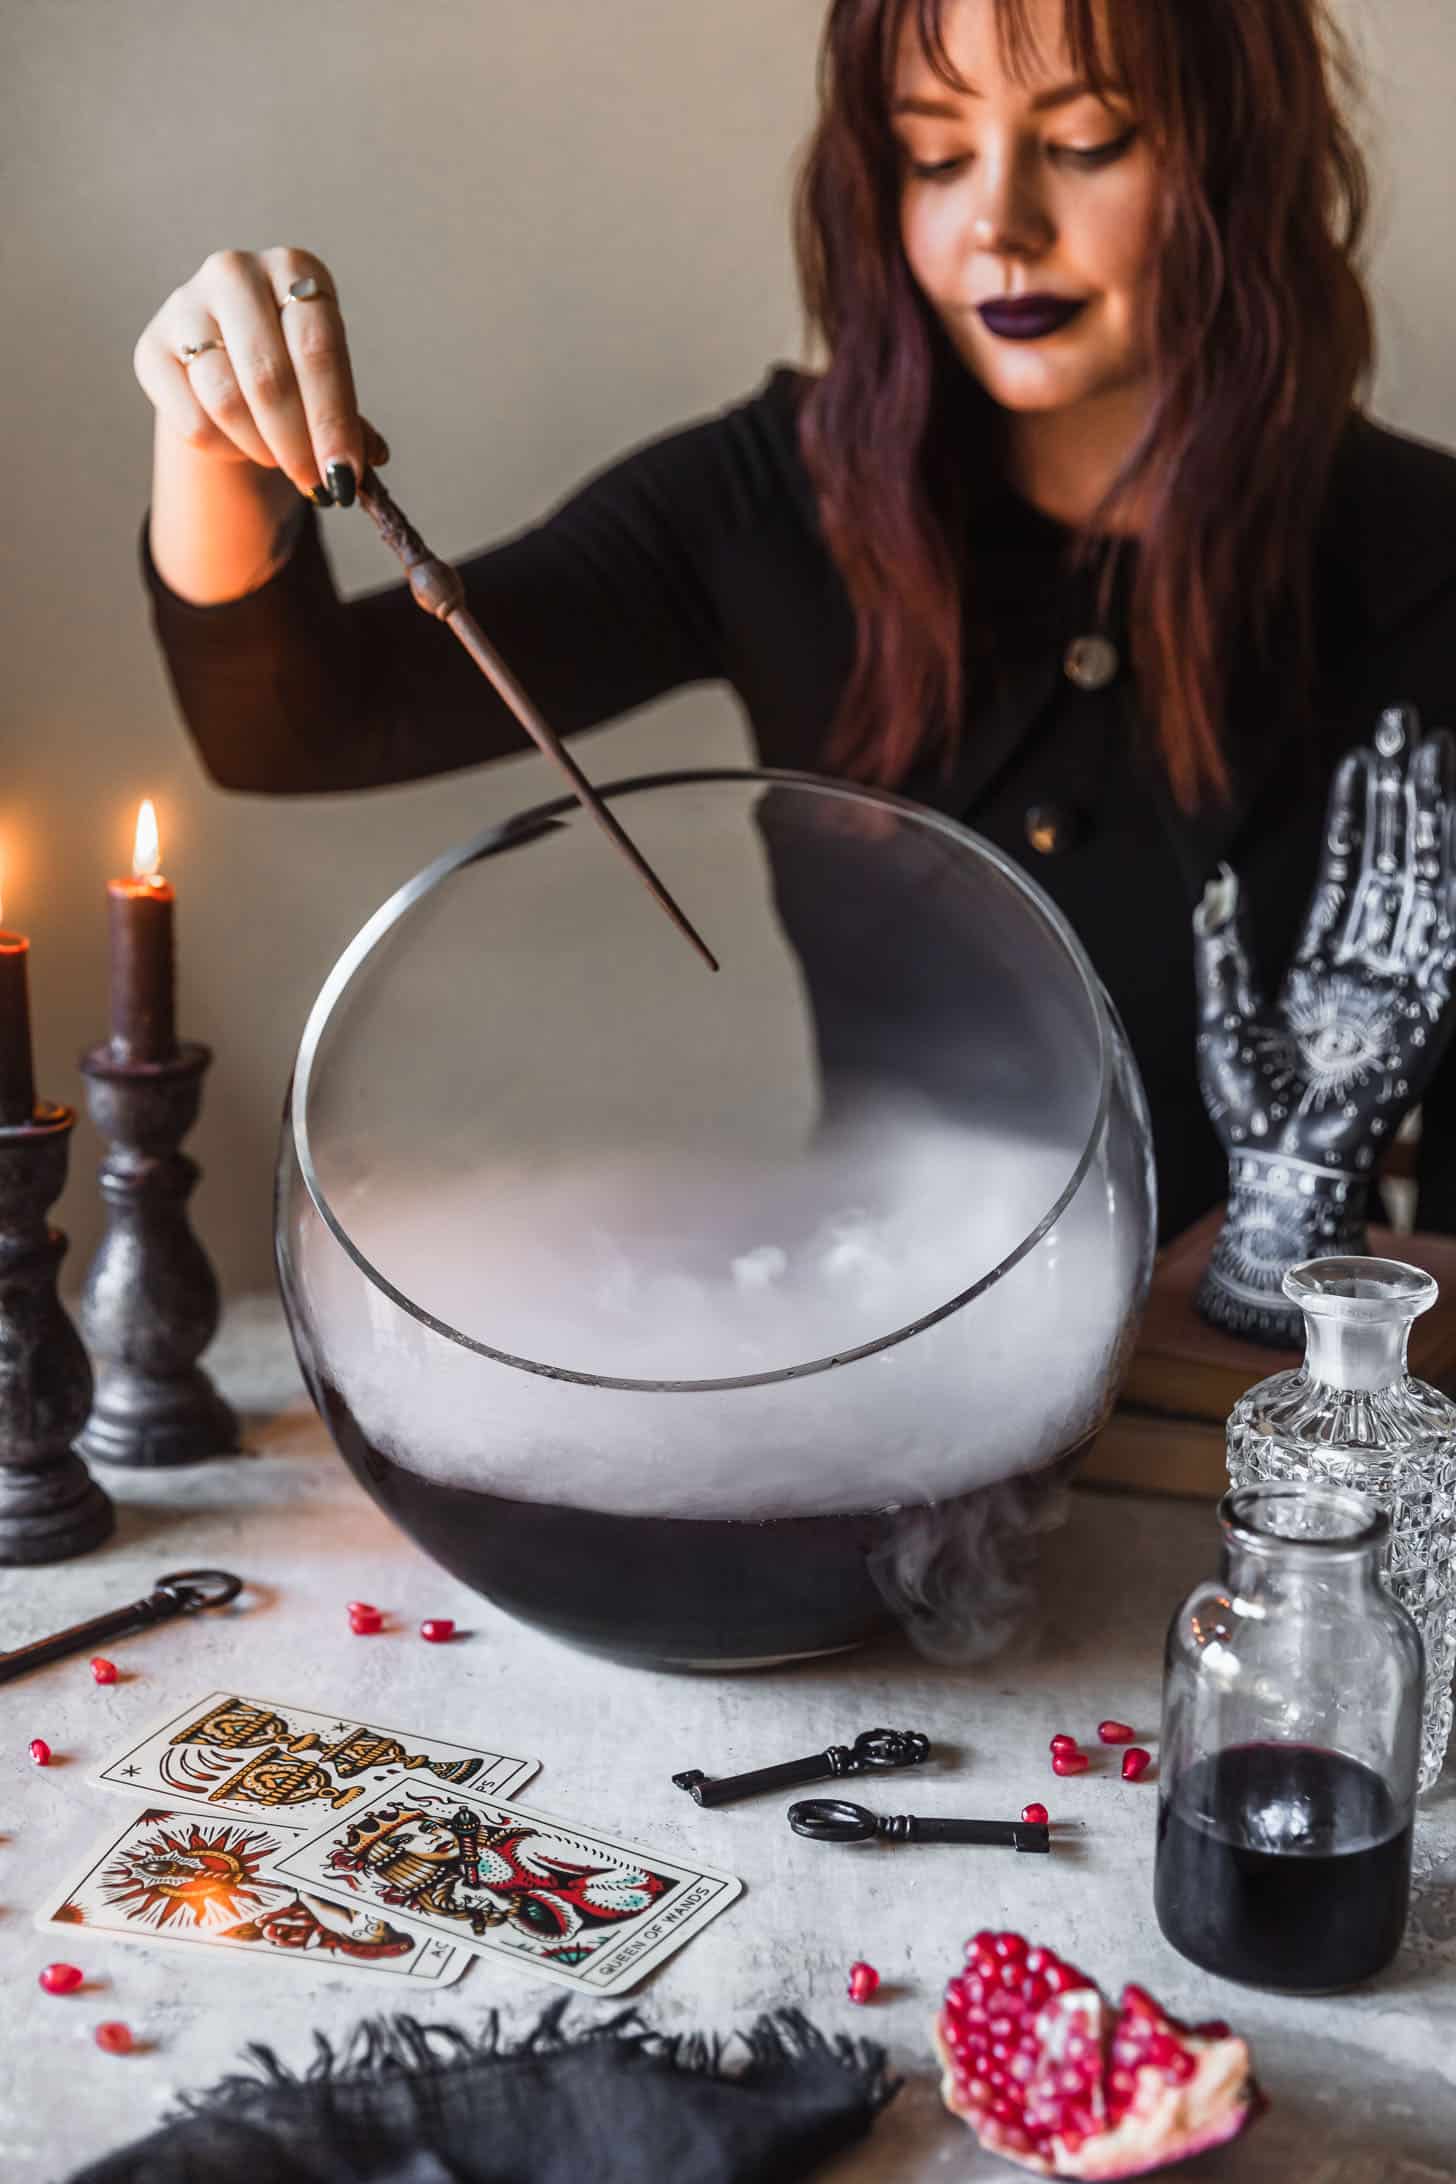 A woman in a black dress waving a wand over a bowl of witches brew cocktail punch next to potion bottles, vintage keys, and tarot cards on a grey background.